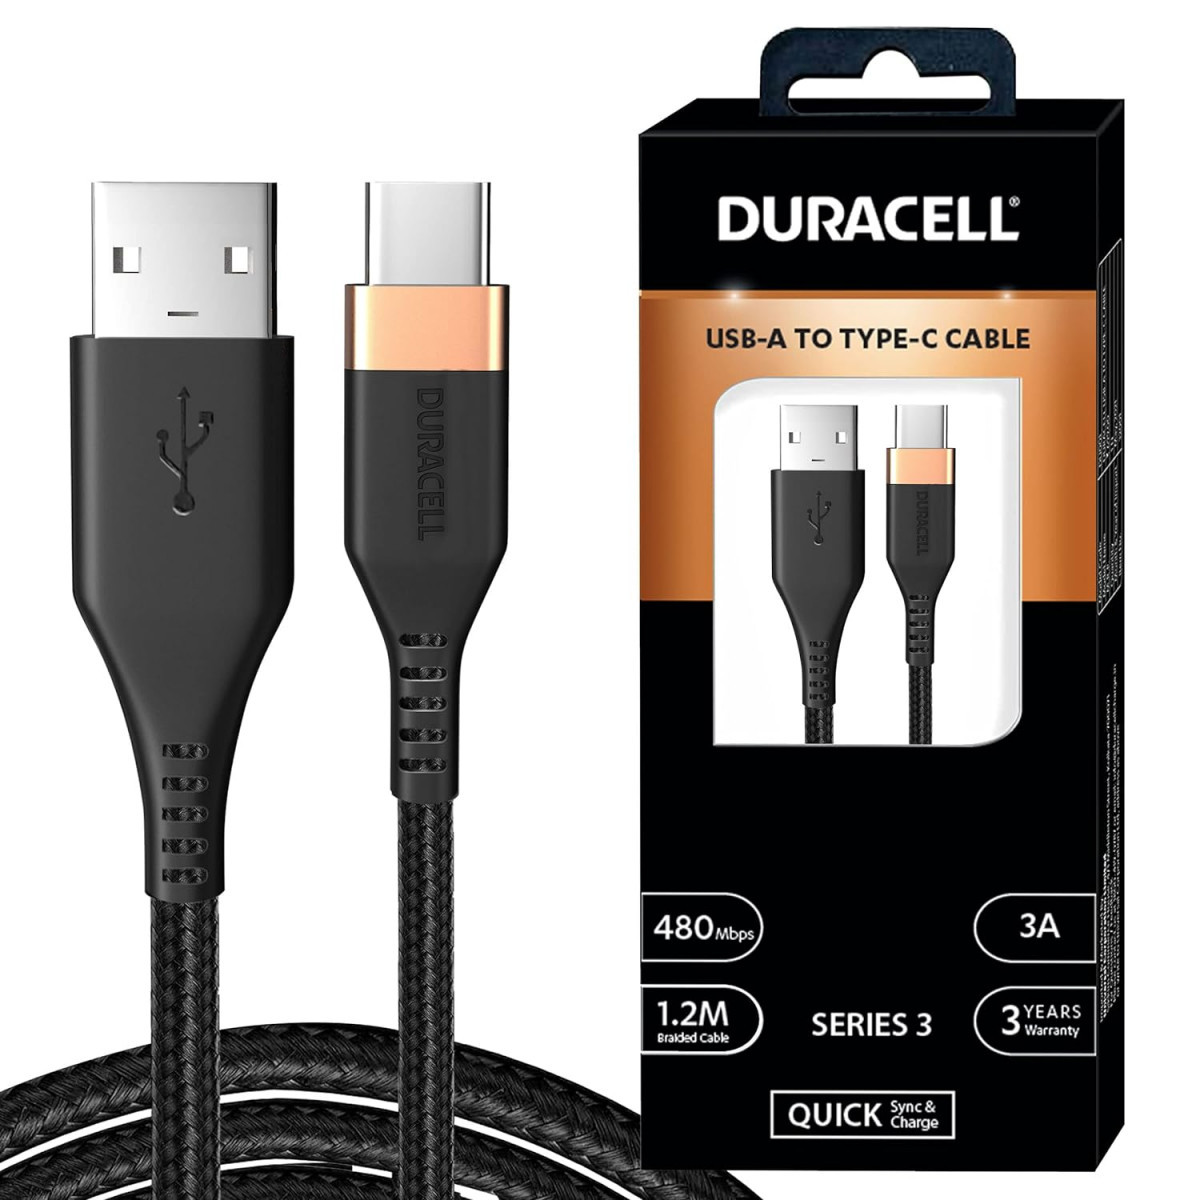 Duracell Powerbank 10000mh with Series 3 - A to C Cable